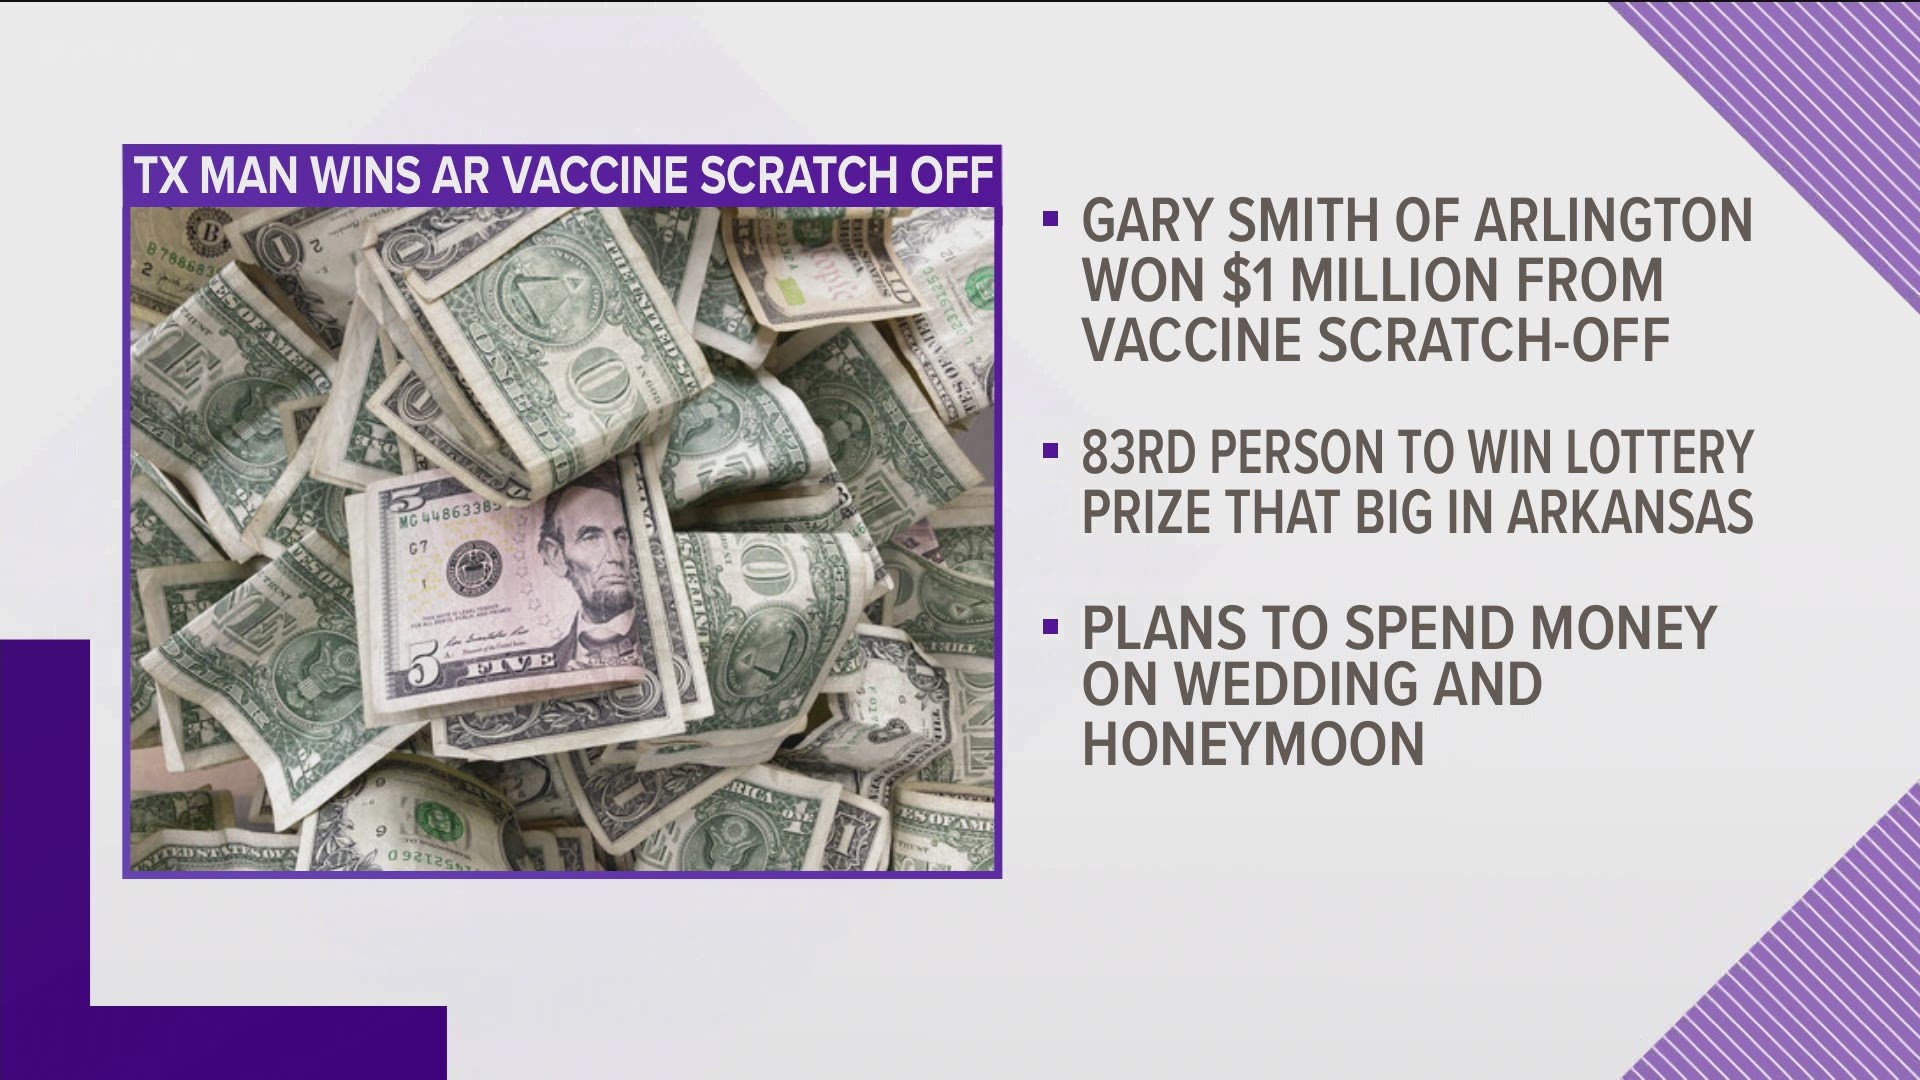 Gary Smith, who won $1 million from a scratch-off ticket he got as a vaccine incentive, will use the winnings to have the wedding and honeymoon of his dreams.